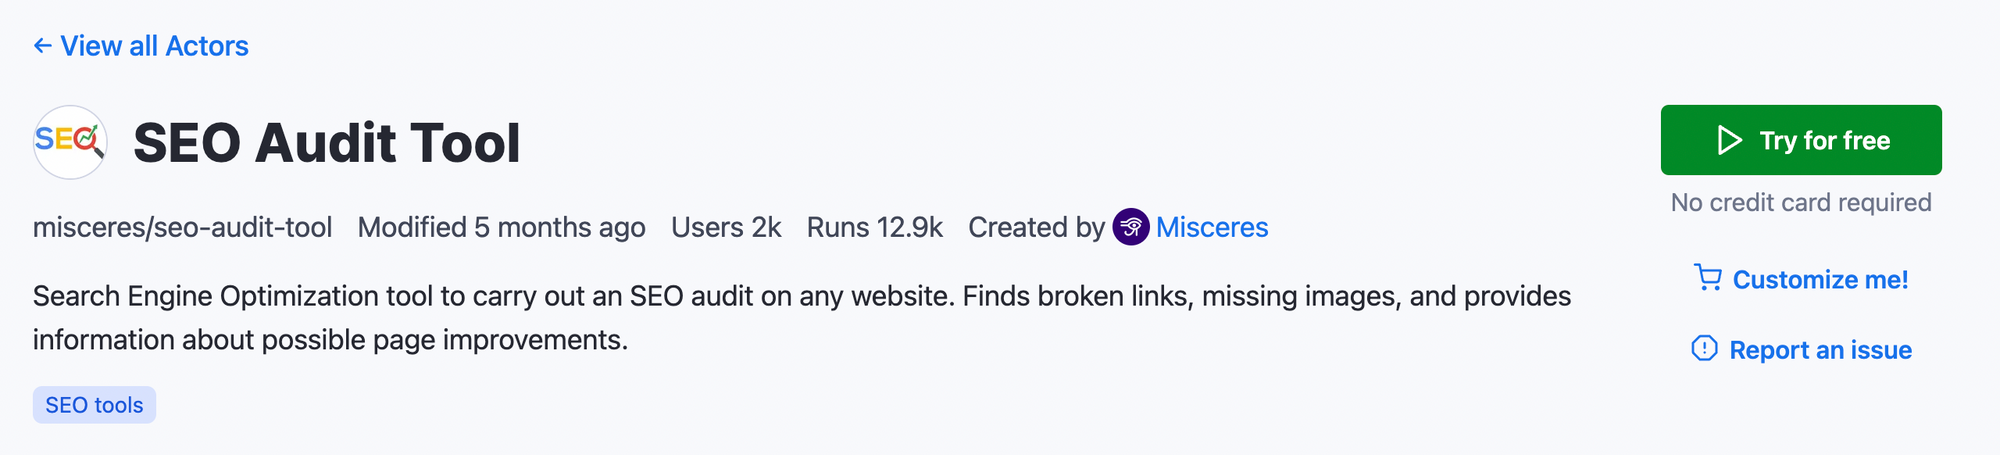 Besides finding new broken links, it will also suggest page improvements